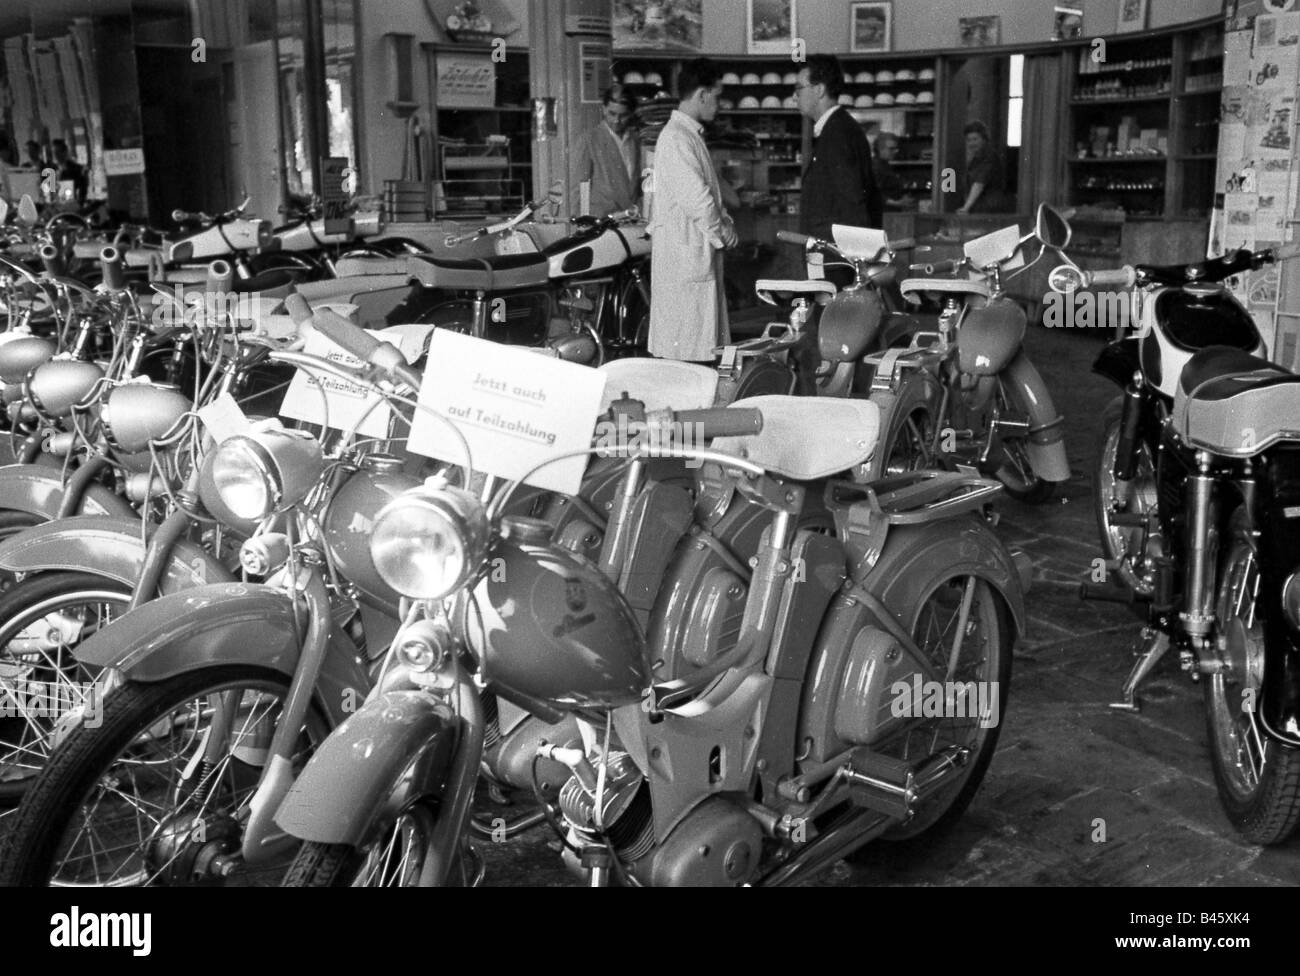 transport/transportation, motorcycle, moped SR2E of the Simson/Suhl company, in a shop, July 1963, Stock Photo